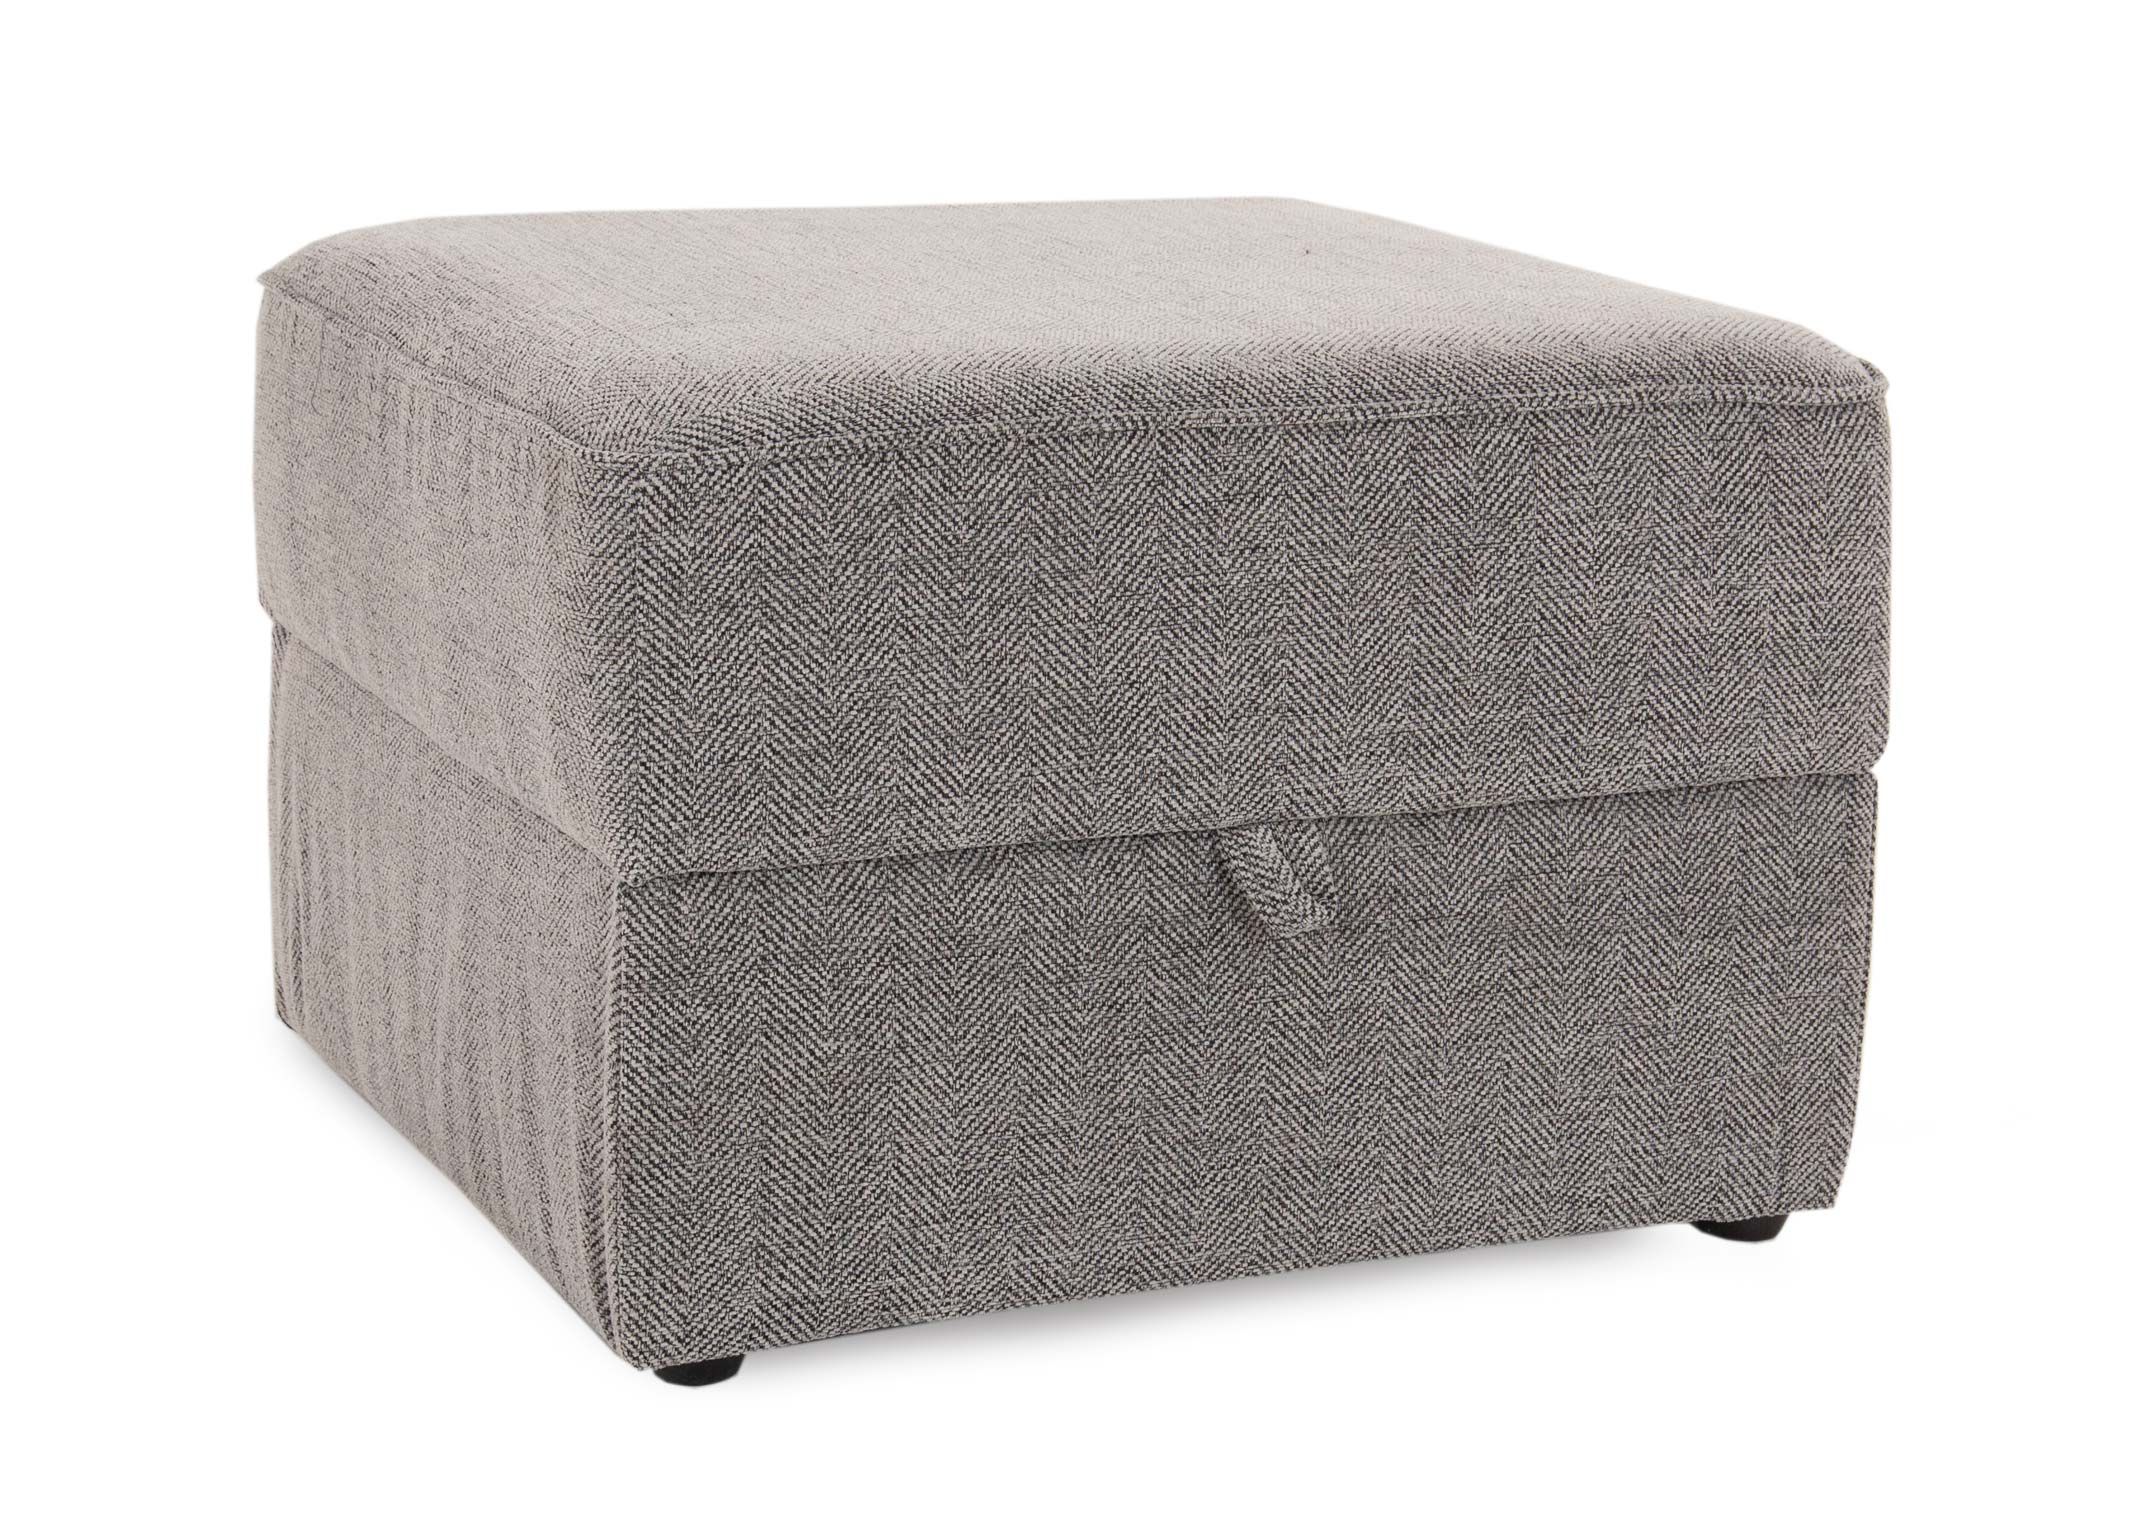 https://www.ezlivingfurniture.ie/media/catalog/product/1/3/134861_8_grey-fabric-storage-footstool-tilly-ang.jpg?store=default&image-type=image